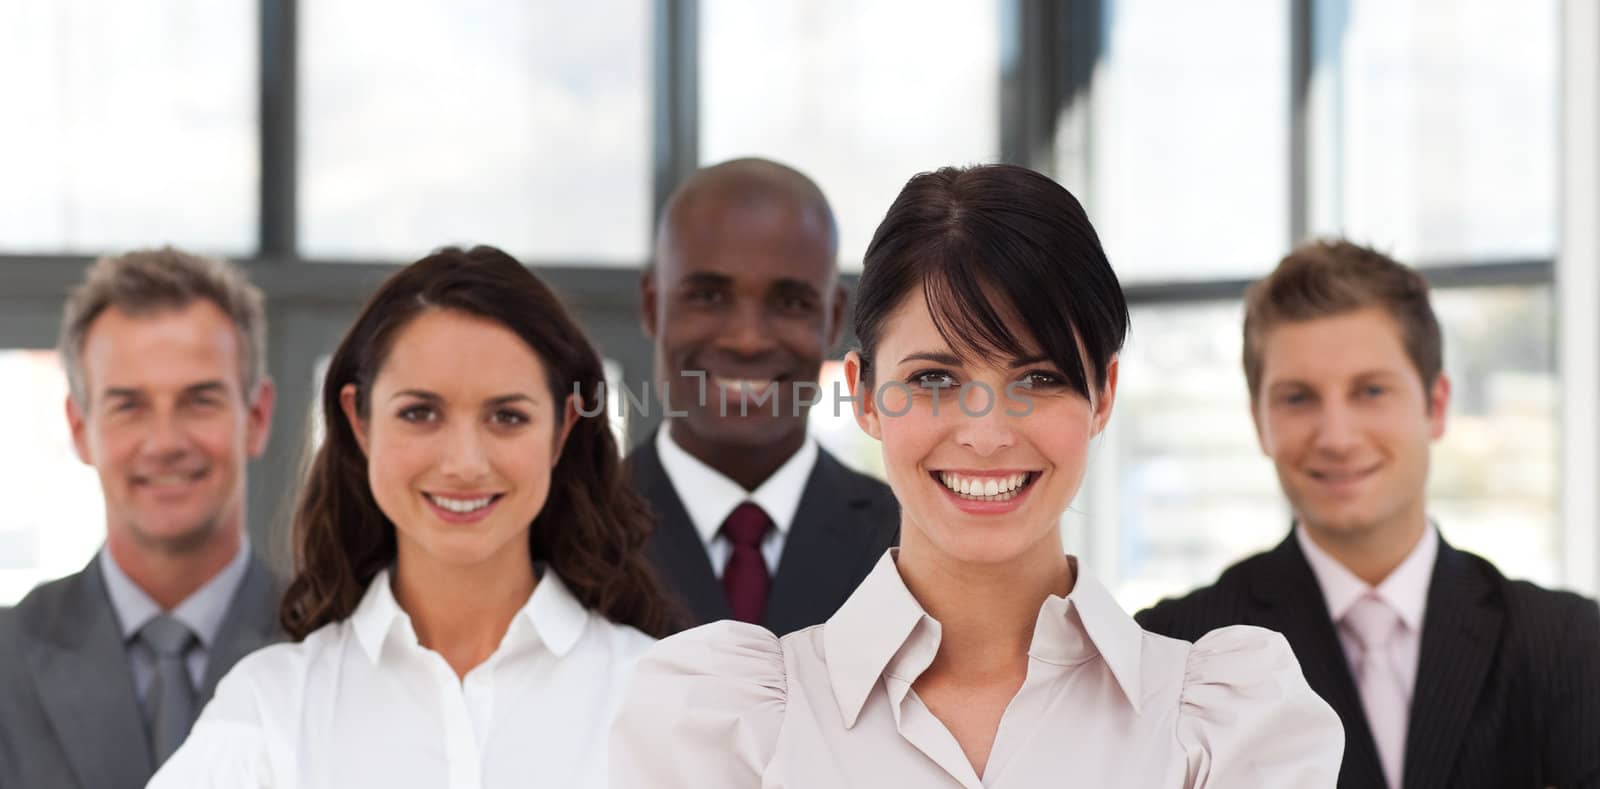 Portrait of several business people looking at the camera in a office